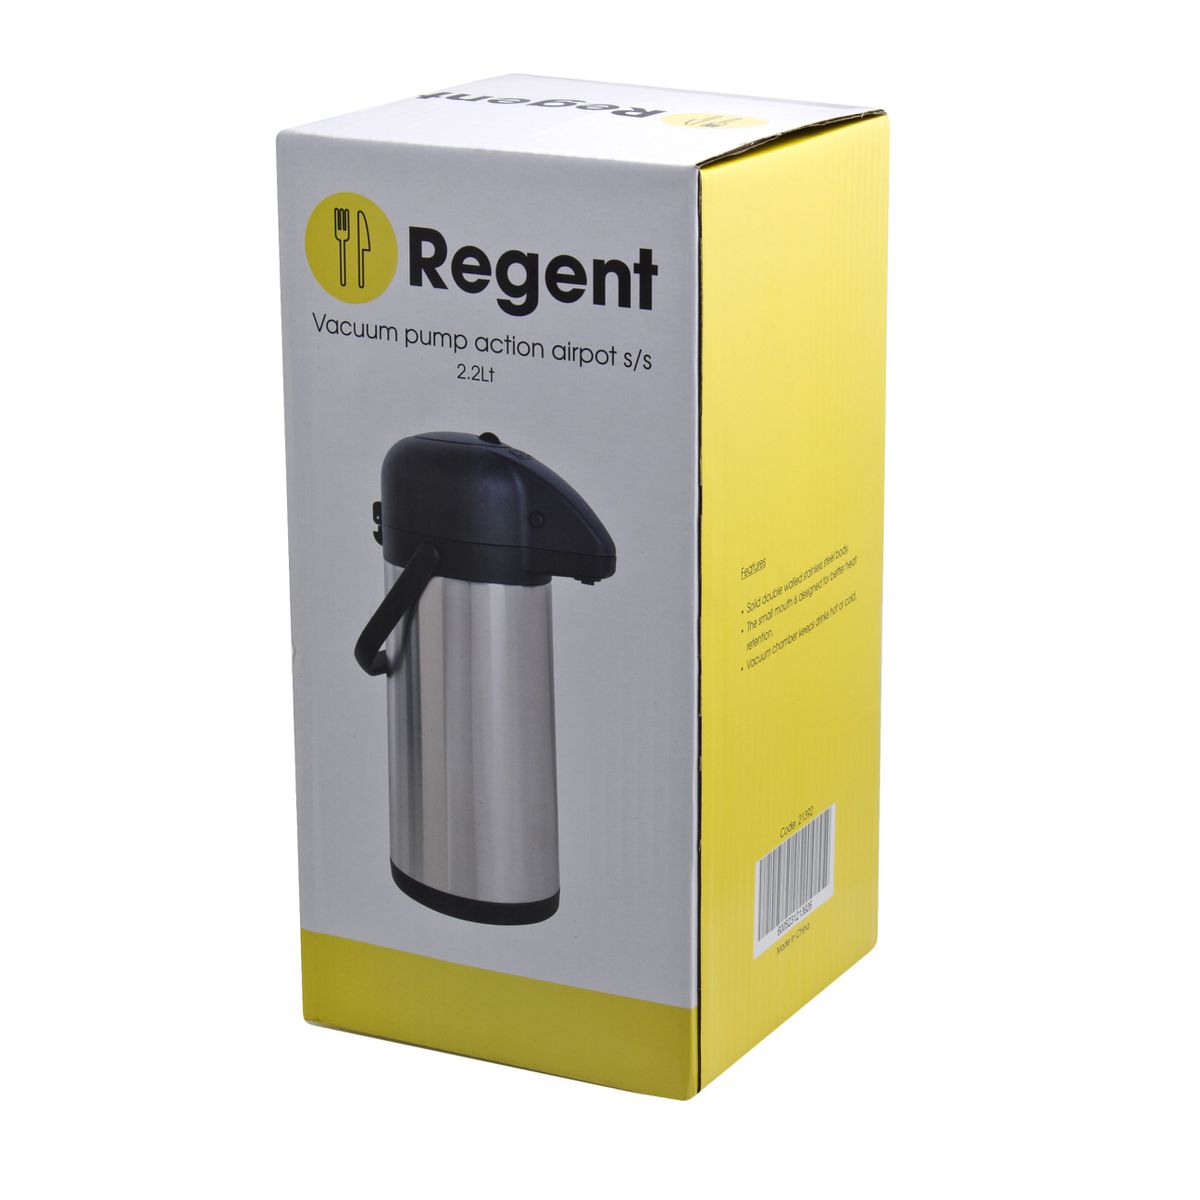 Regent Vacuum Flask Airpot 2.2L Double Wall Pump Action Stainless Steel 21392